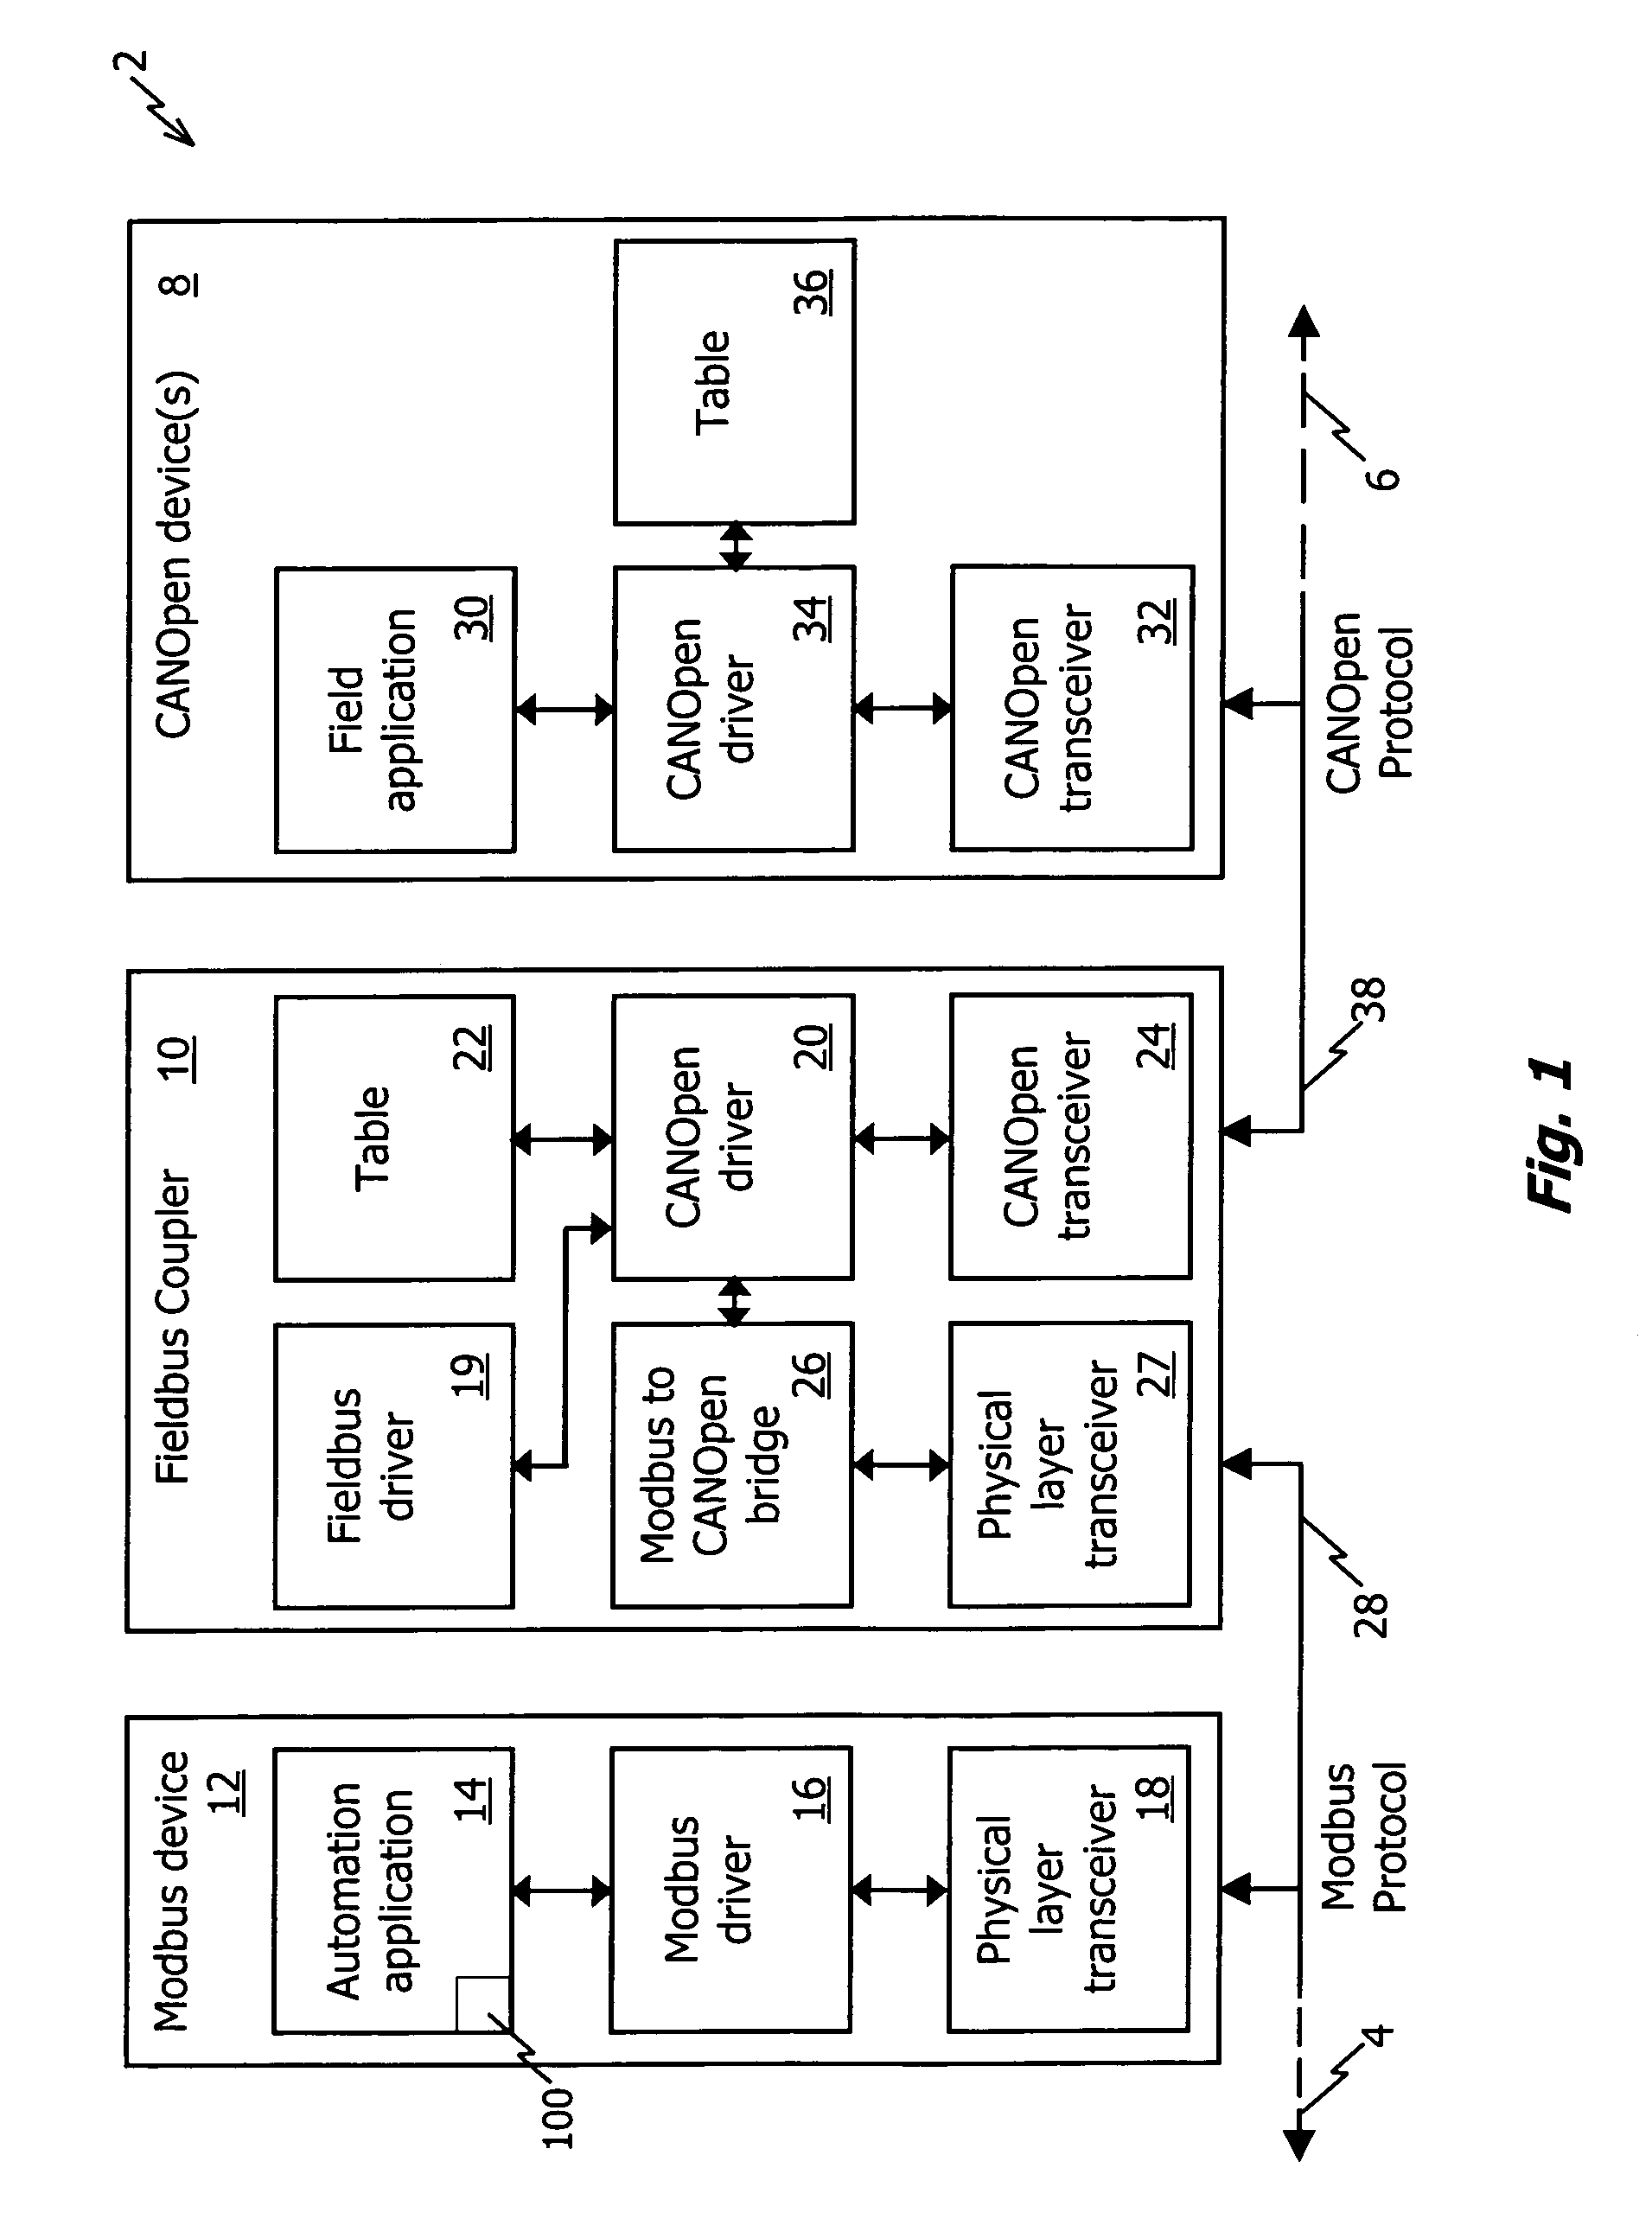 Method, system and program for the transmission of modbus messages between networks